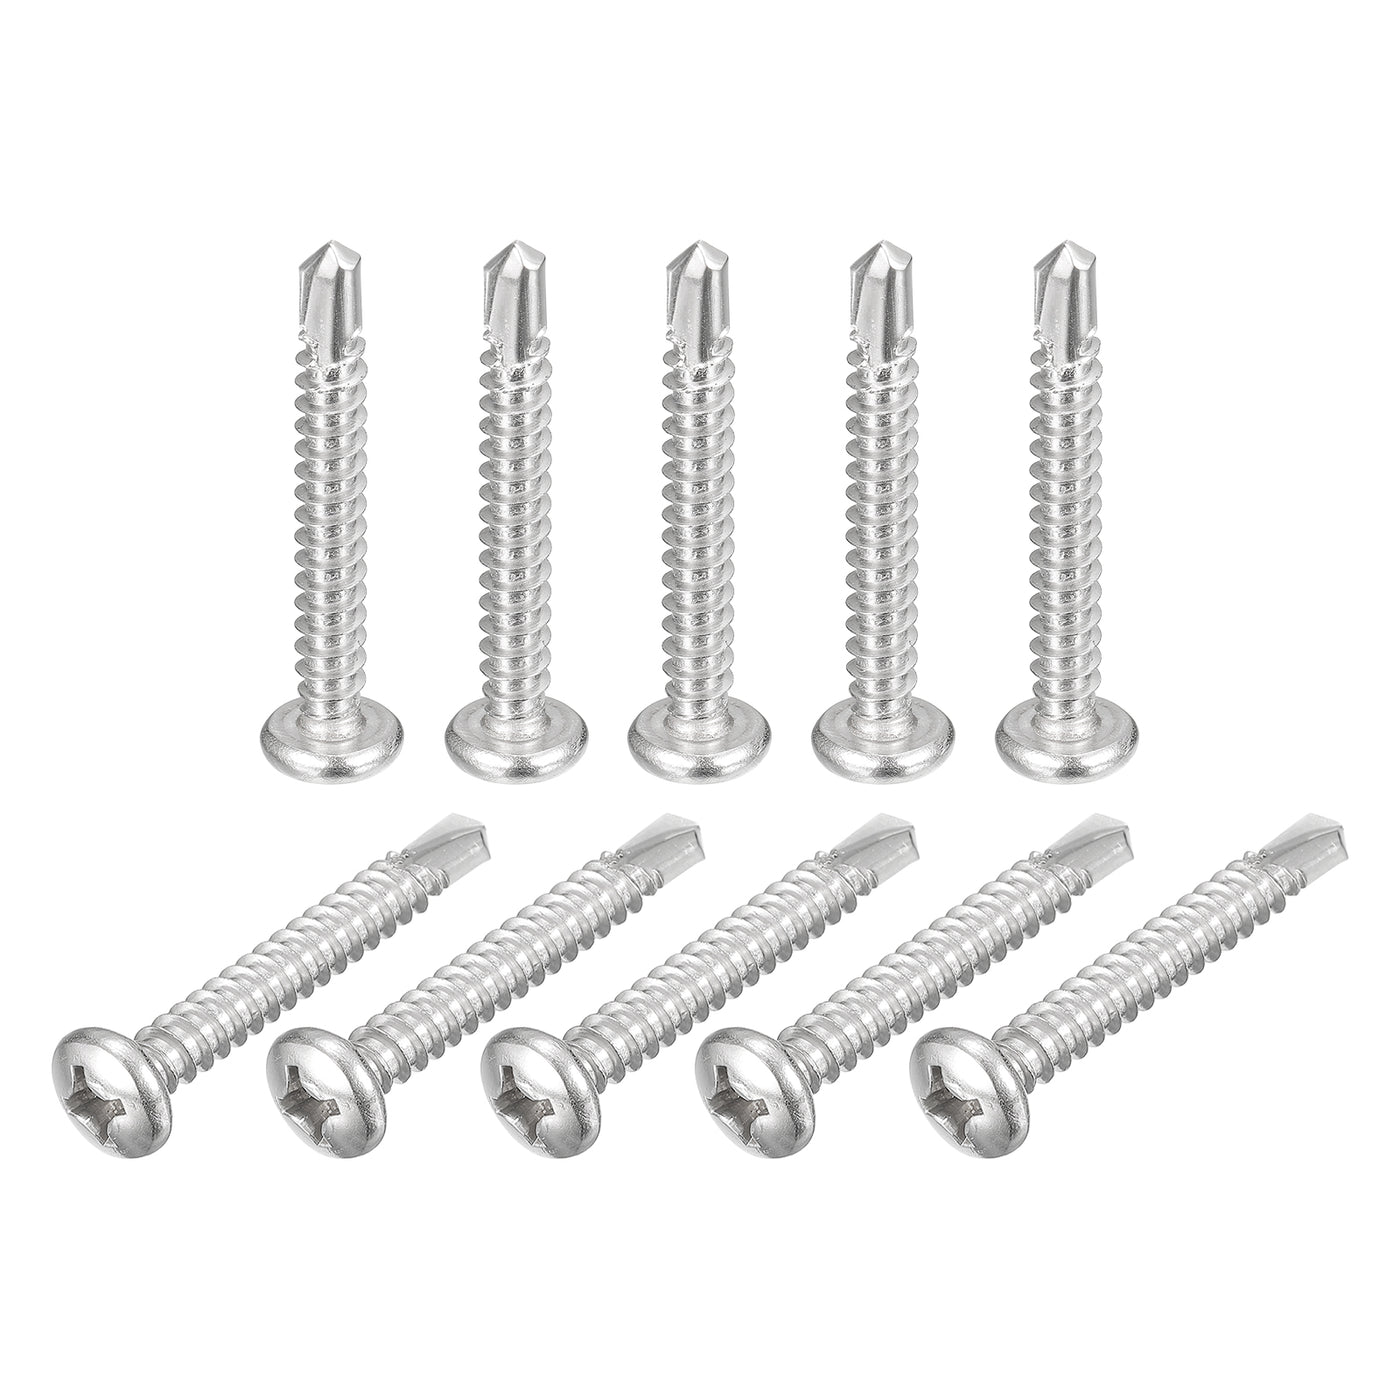 uxcell Uxcell #12 x 1-1/2" Self Drilling Screws, 10pcs Phillips Pan Head Self Tapping Screws